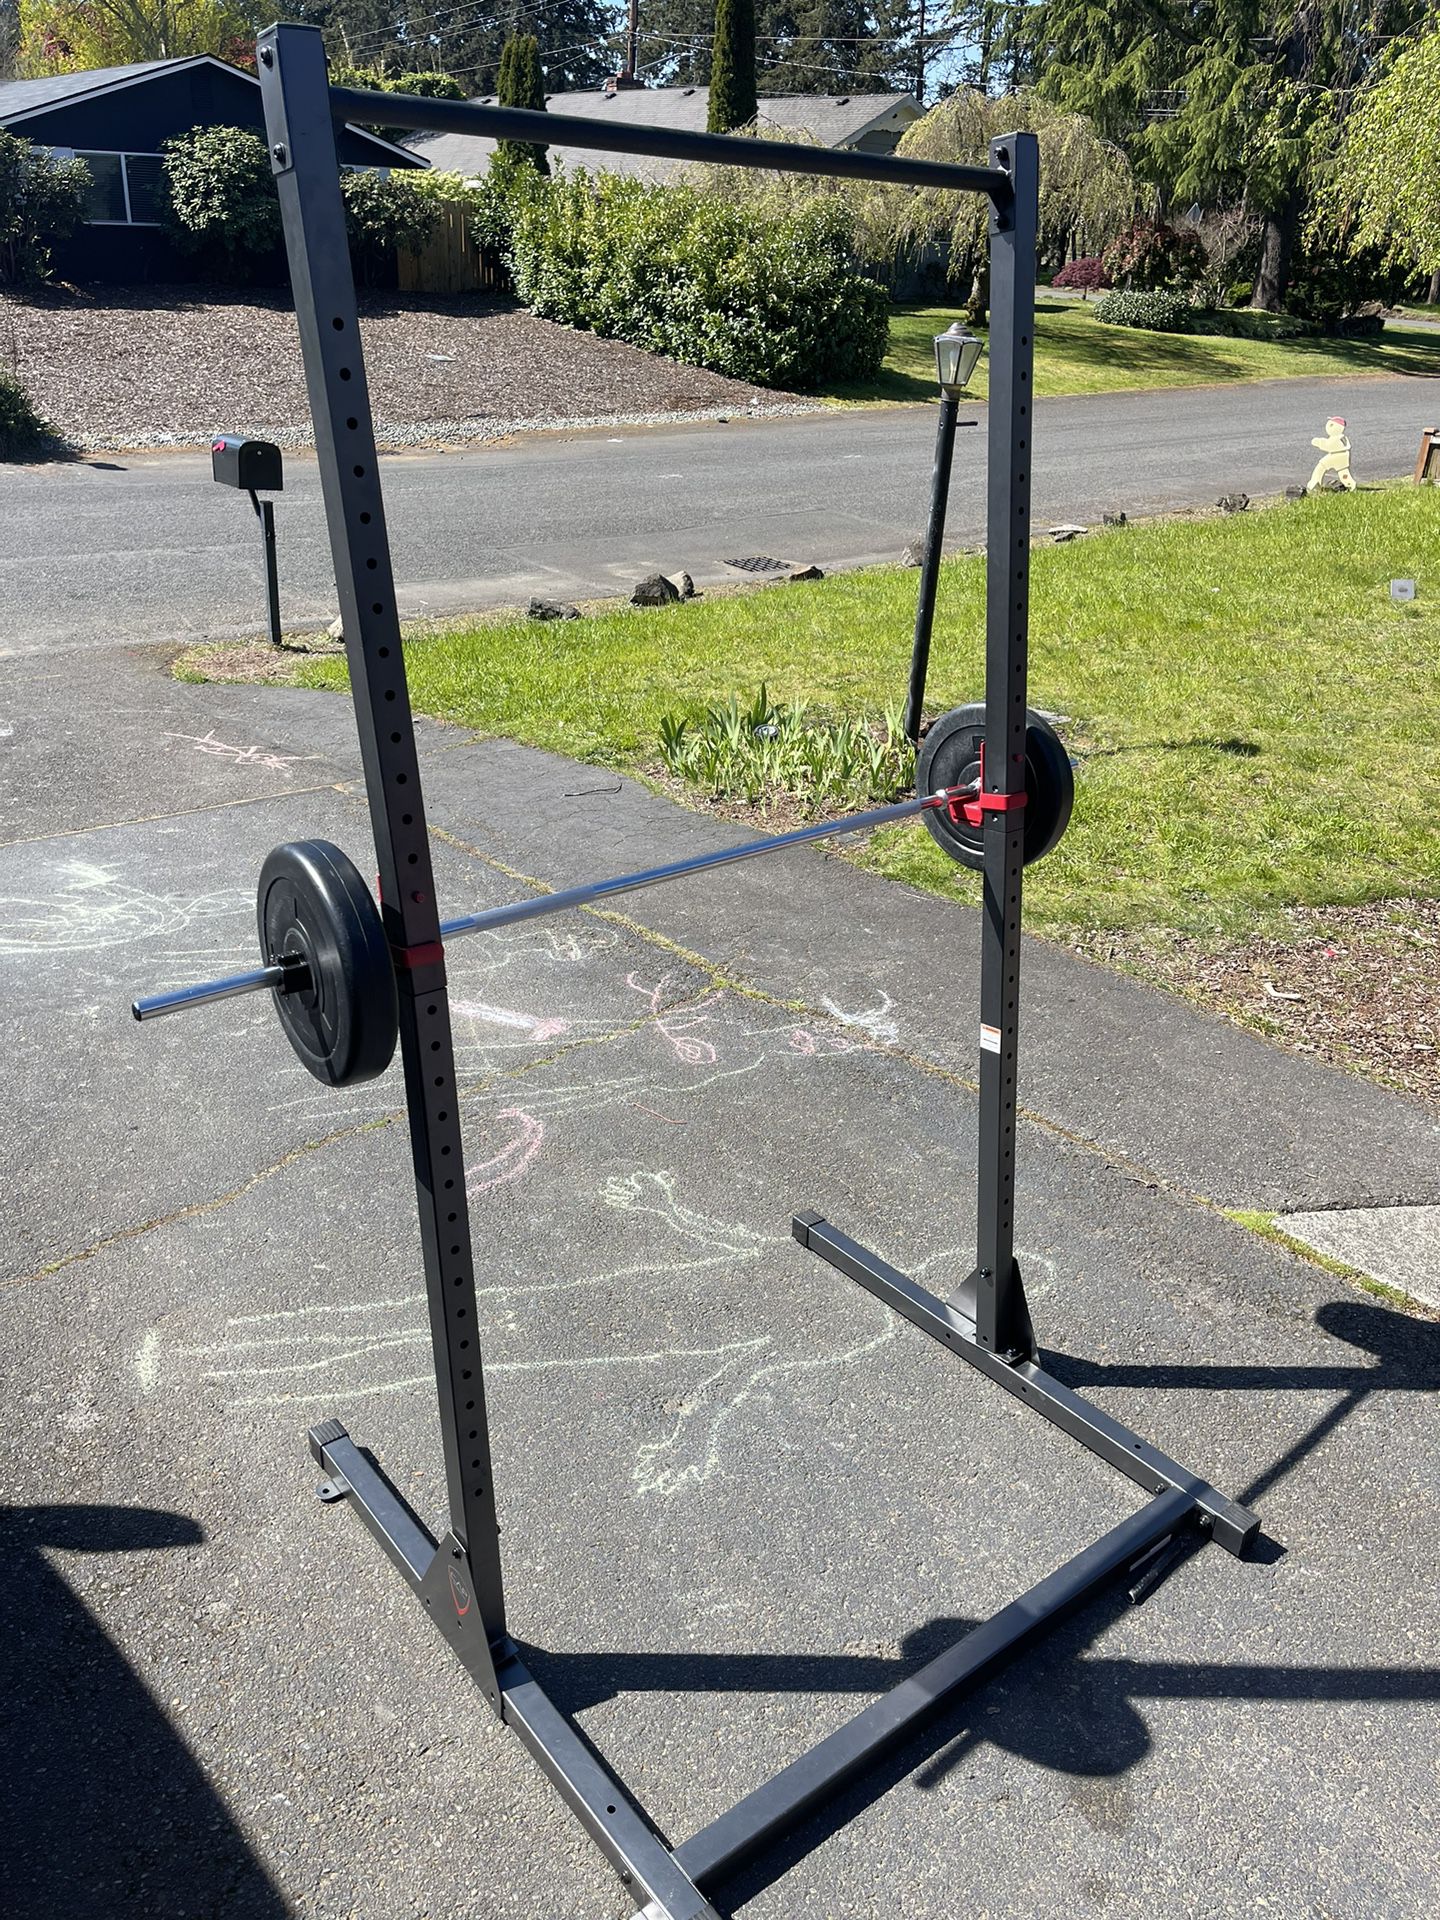 CAP squat Rack With Barbell And Weights